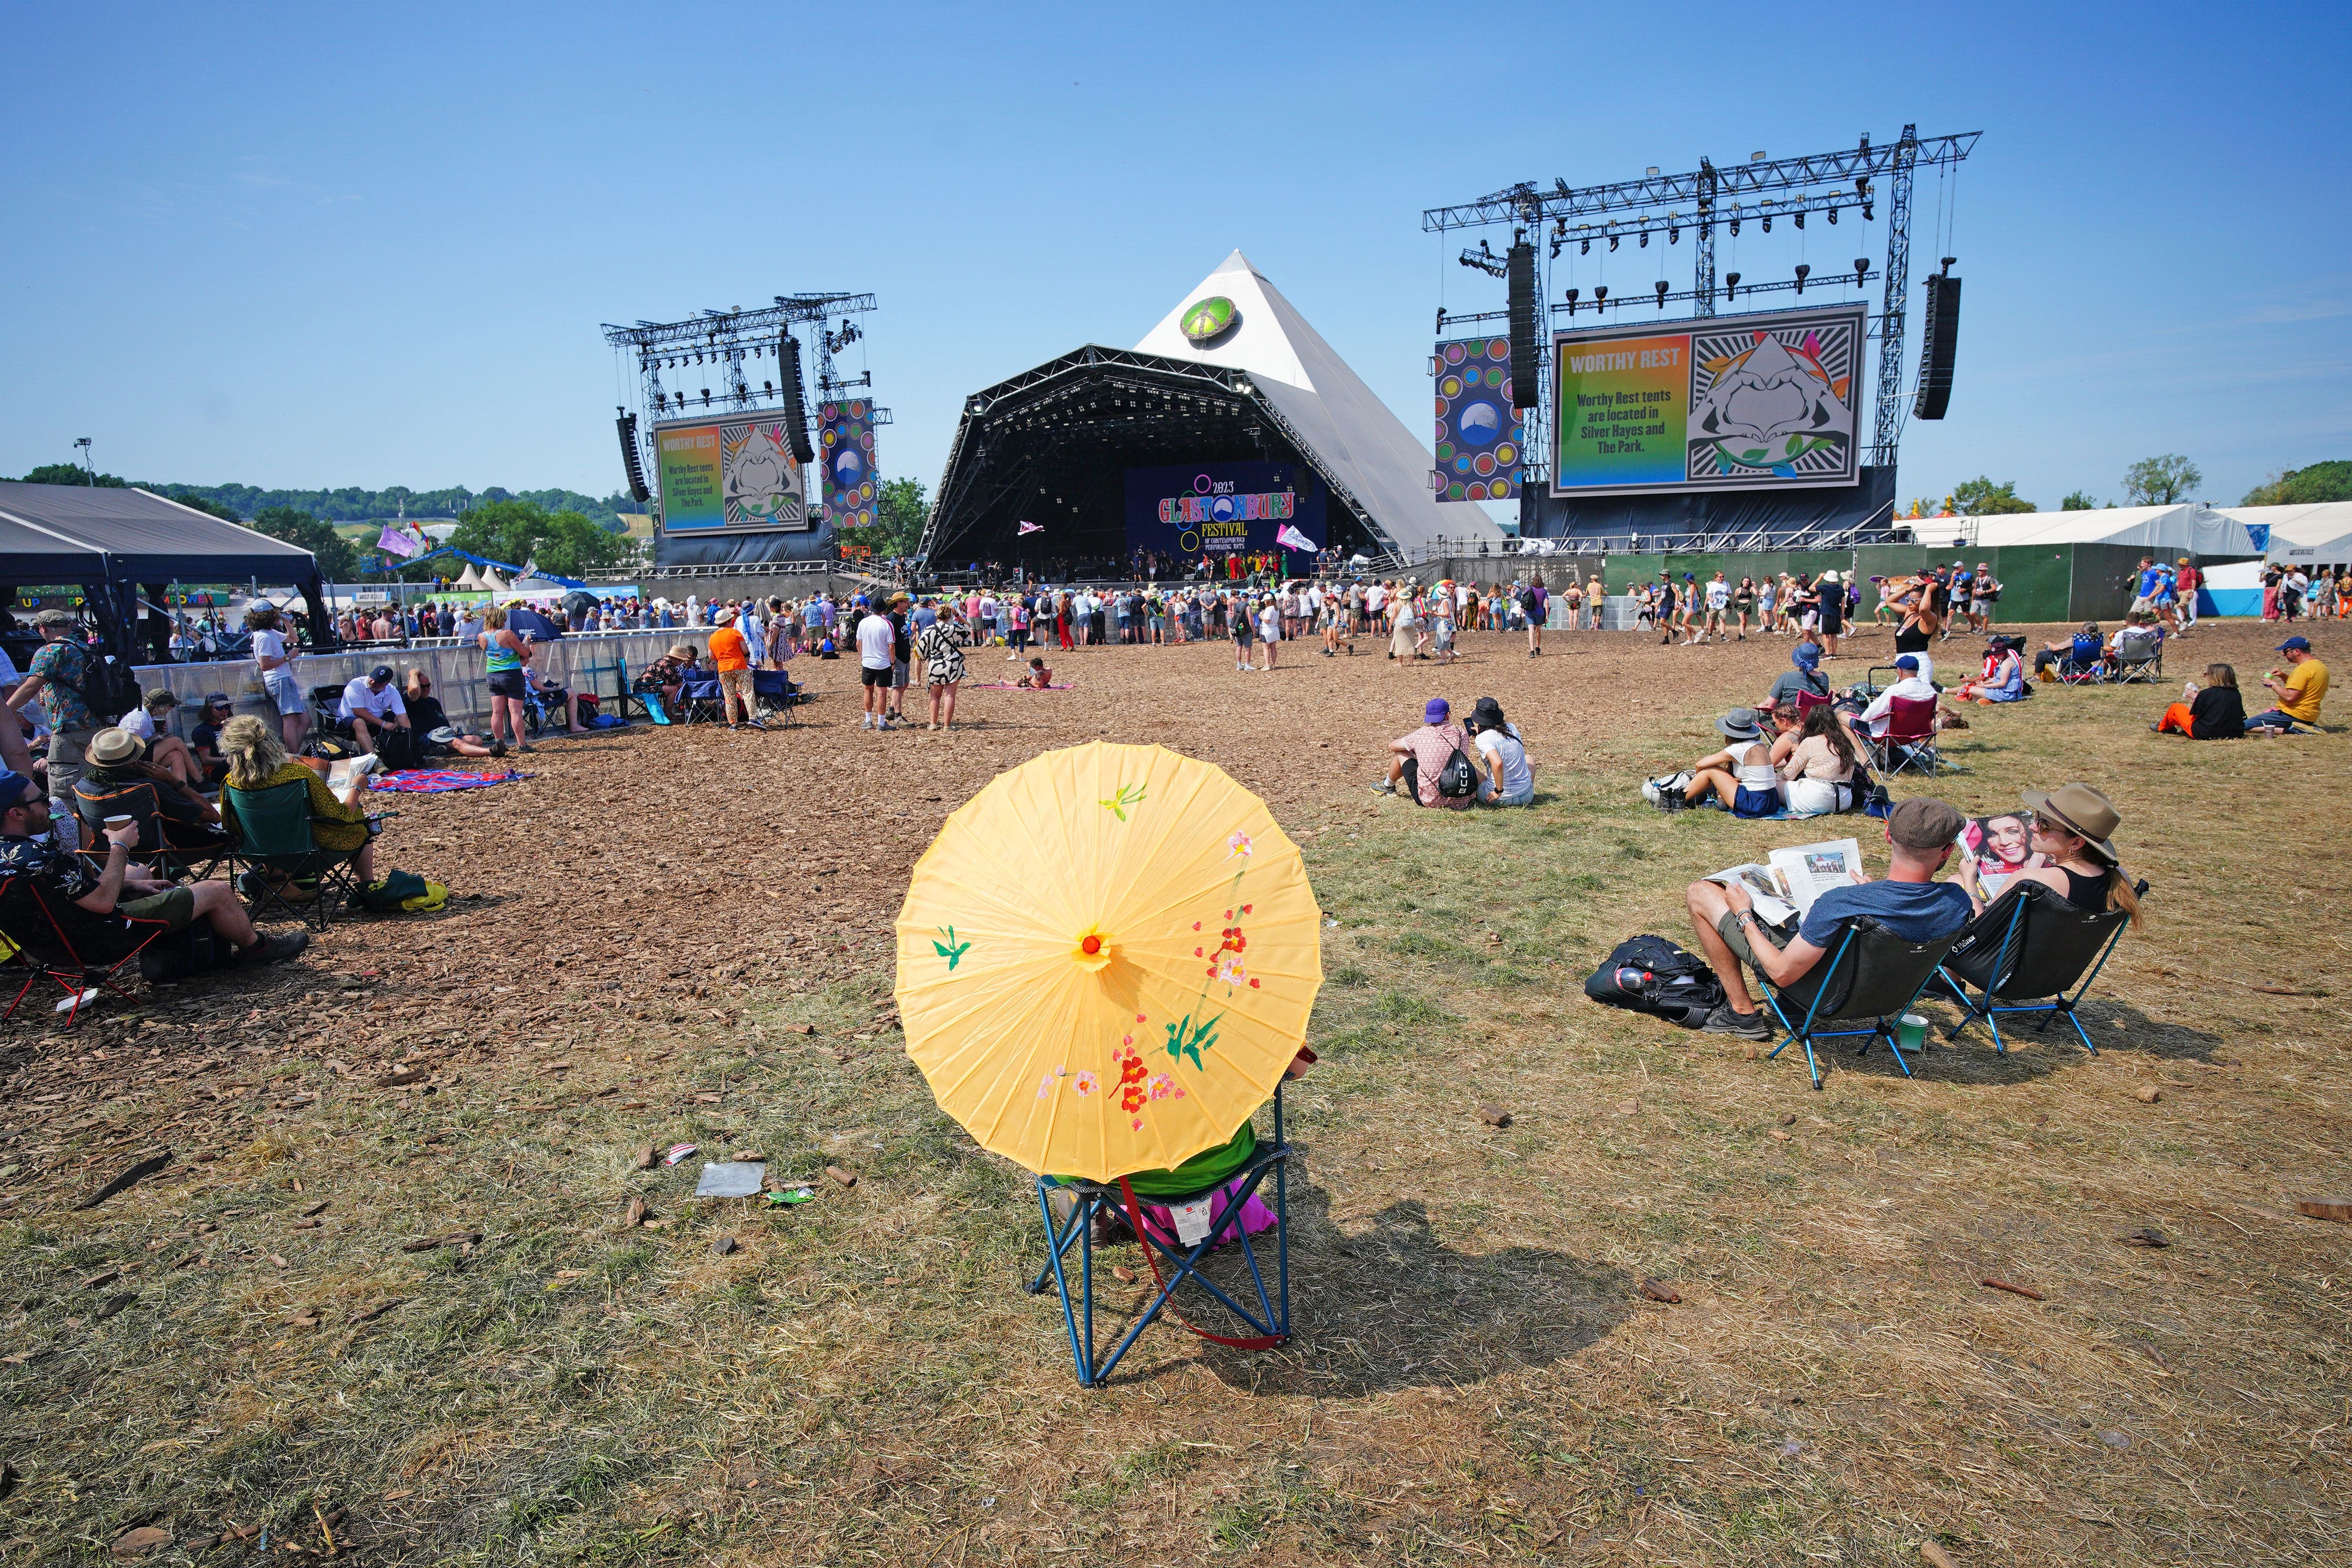 Festivalgoers during the hot weather at the Glastonbury Festival at Worthy Farm in Somerset (Ben Birchall/PA)